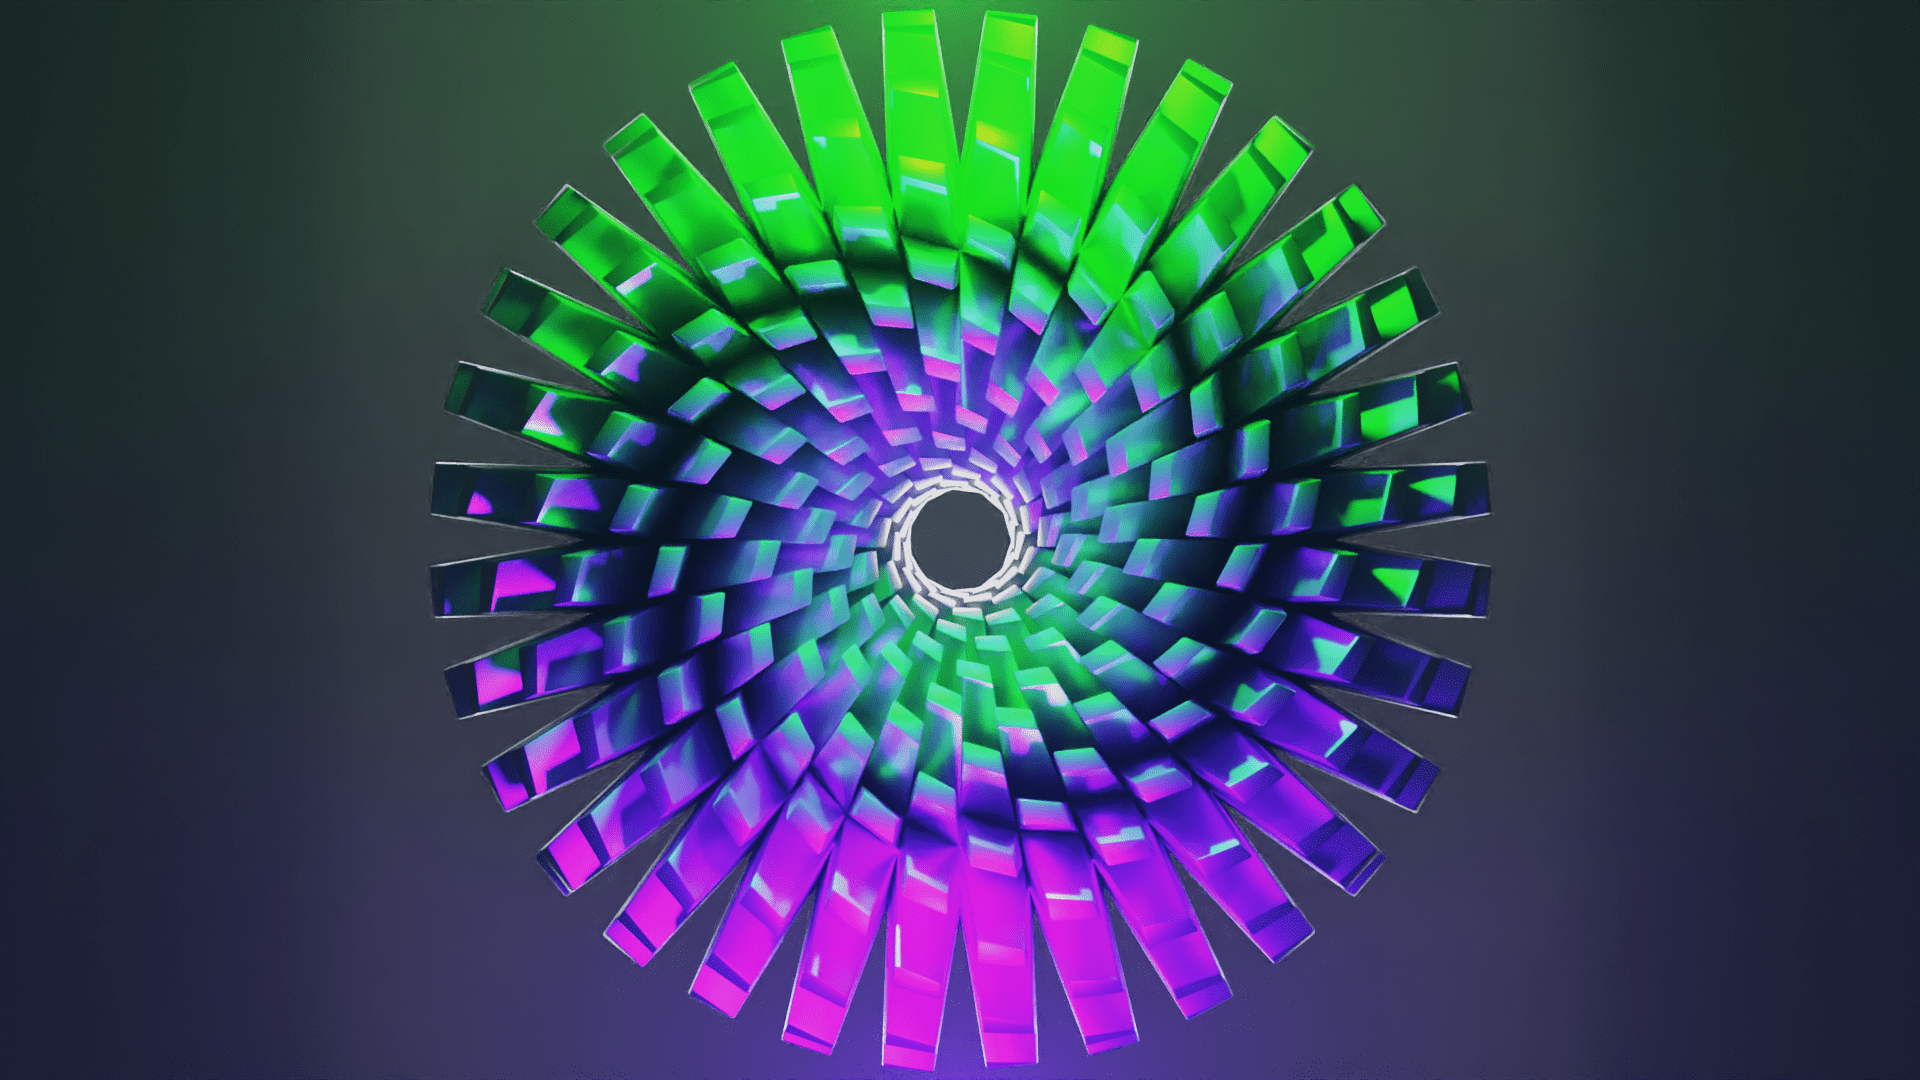 a green and purple lighting of the spiral object